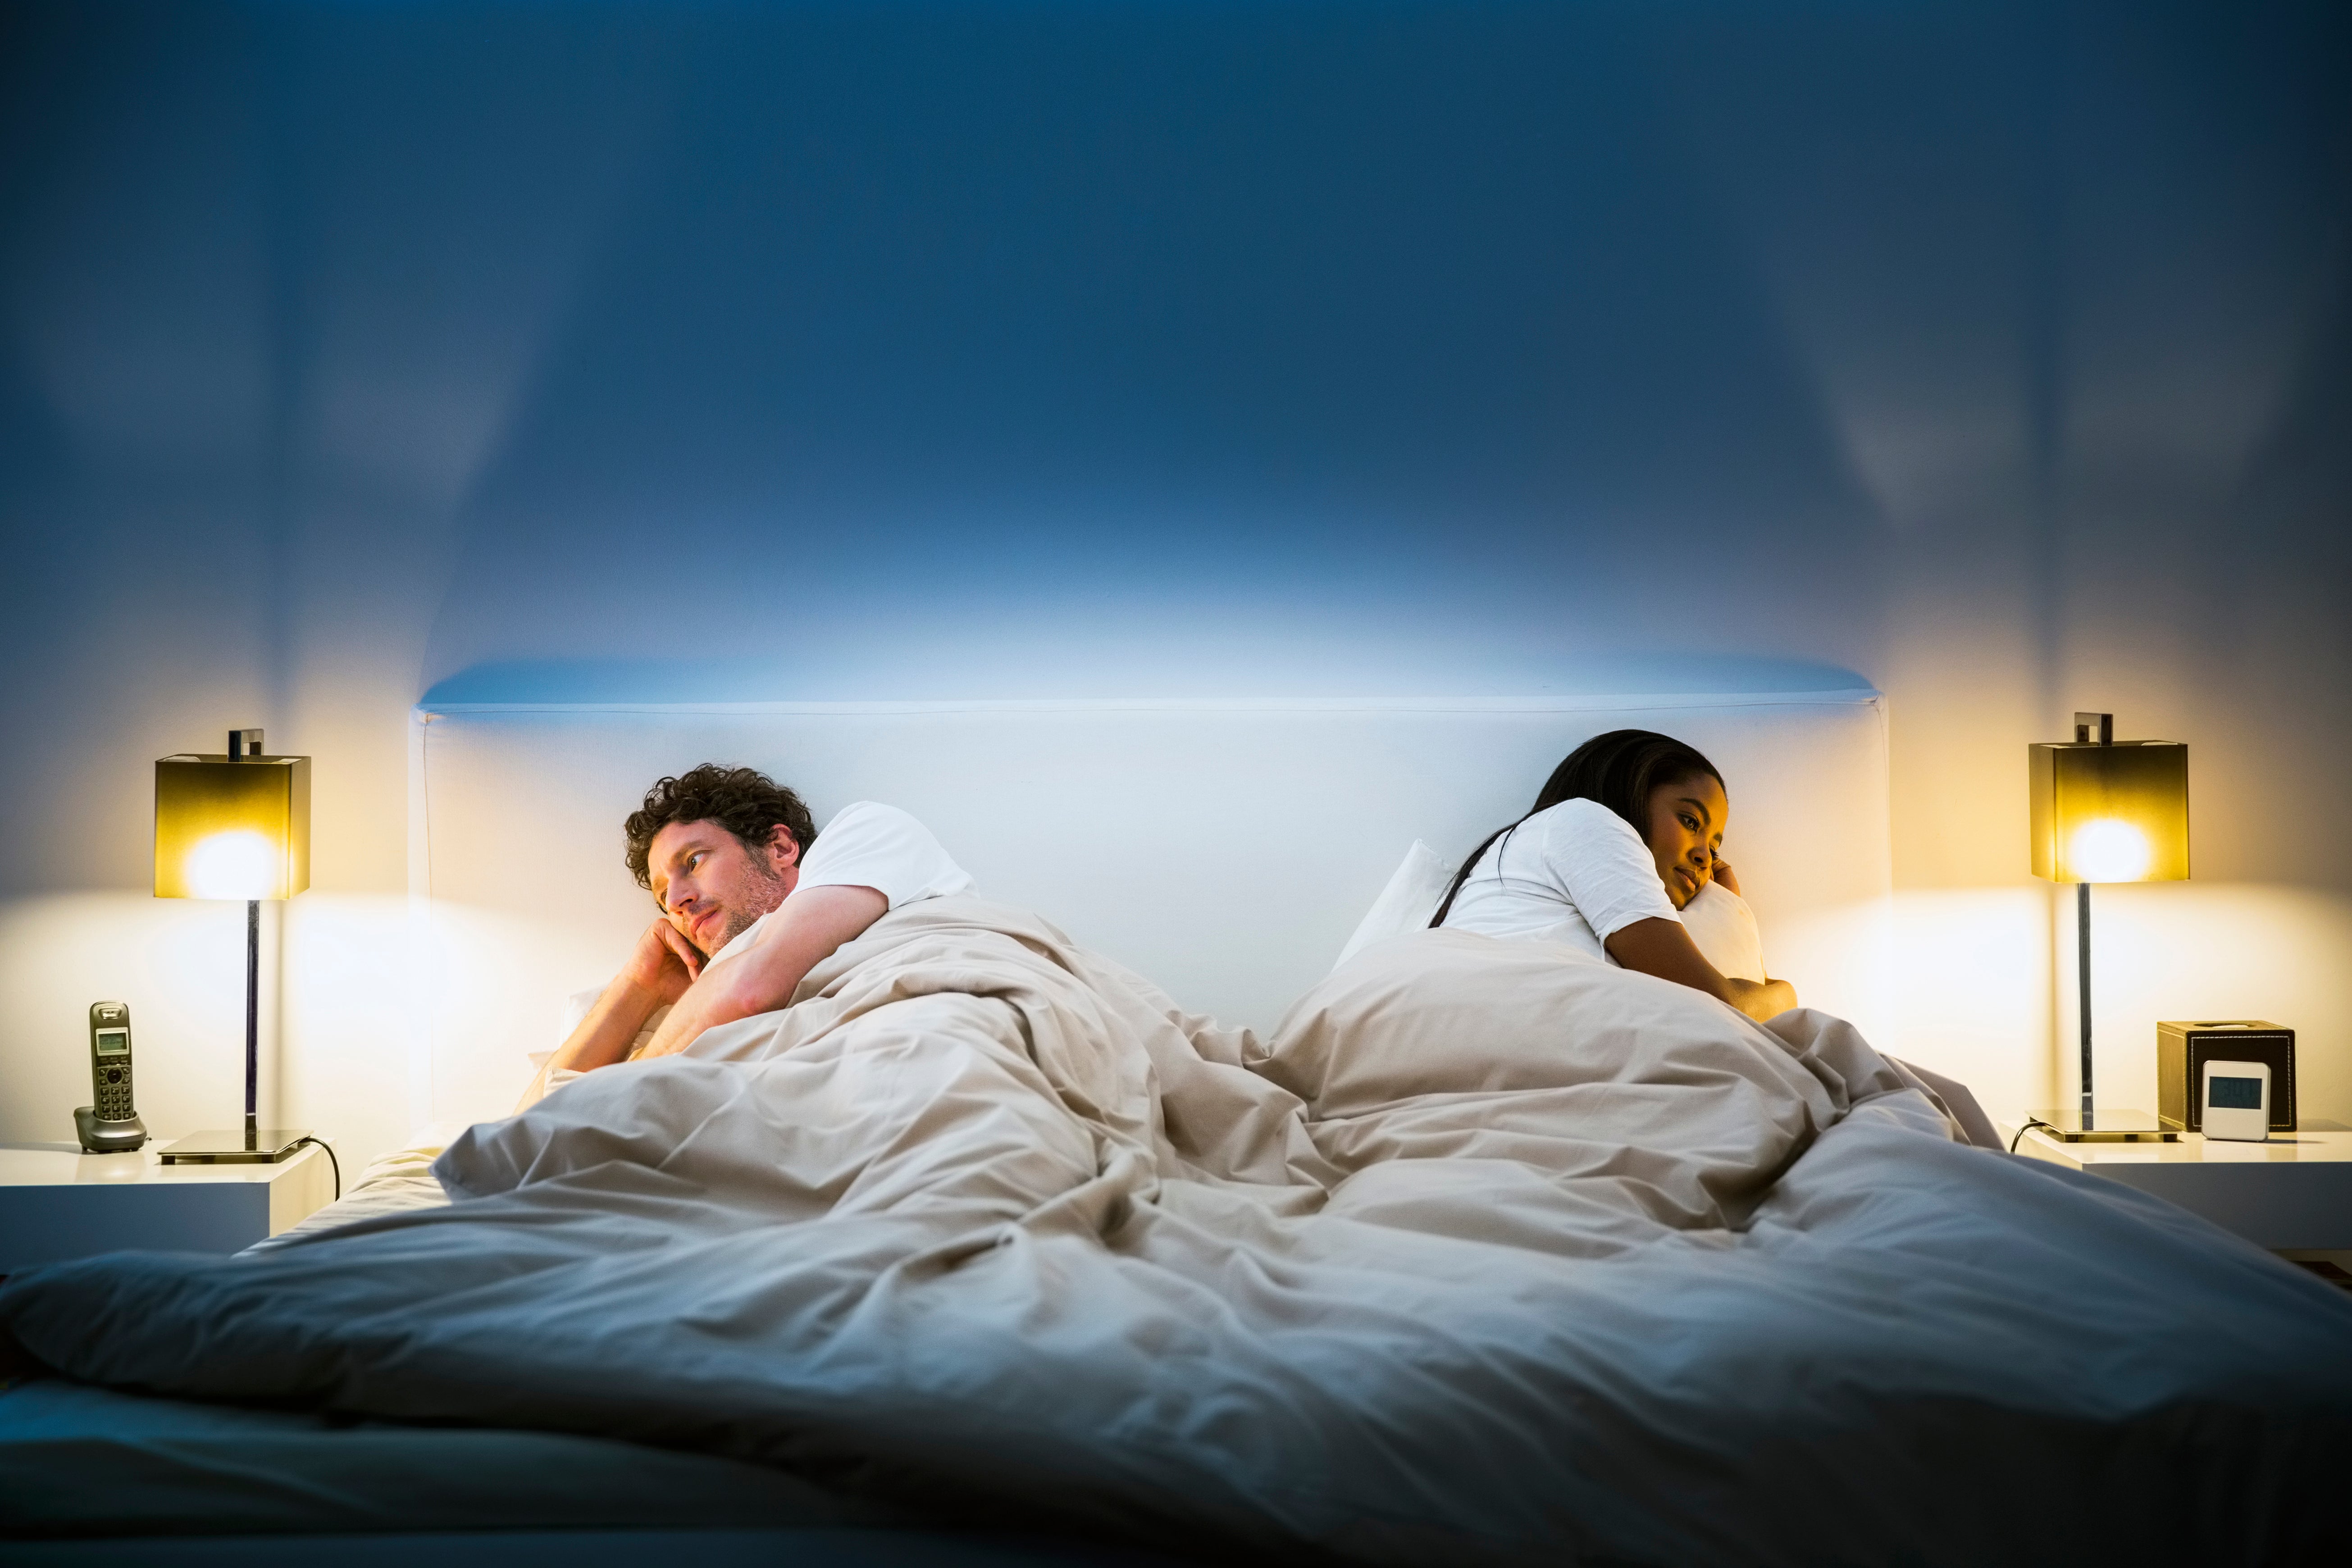 Intimacy Intervention: ‘Suddenly My Man Doesn’t Want to Sleep With Me Anymore’